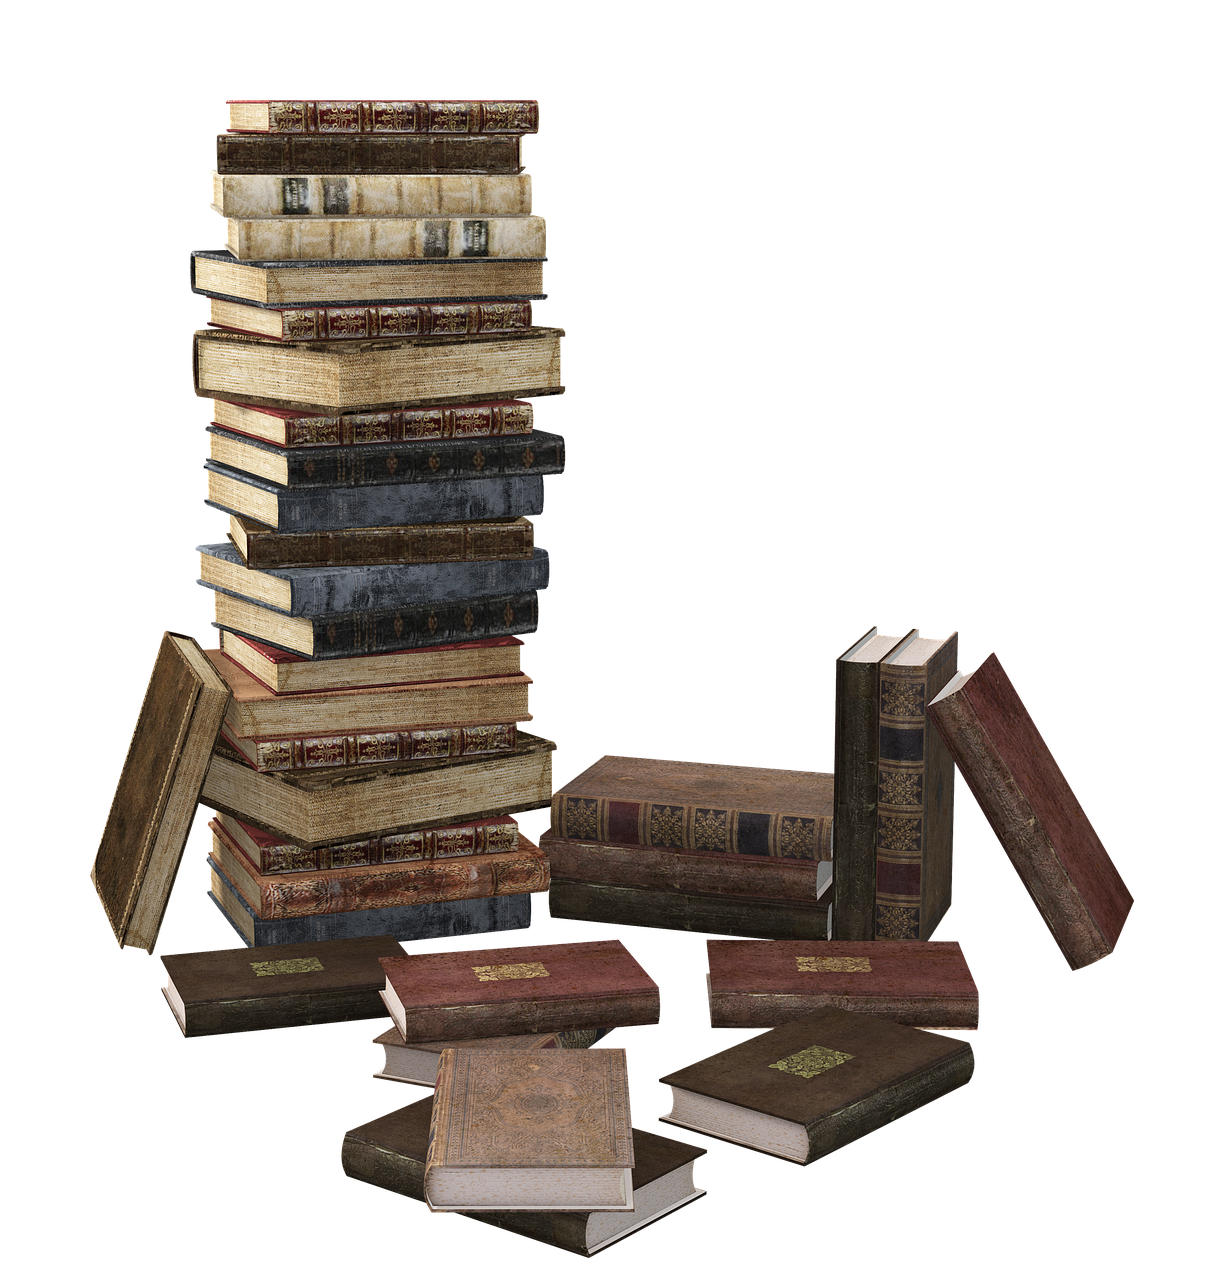 a book, book stack, stacked-3346785.jpg